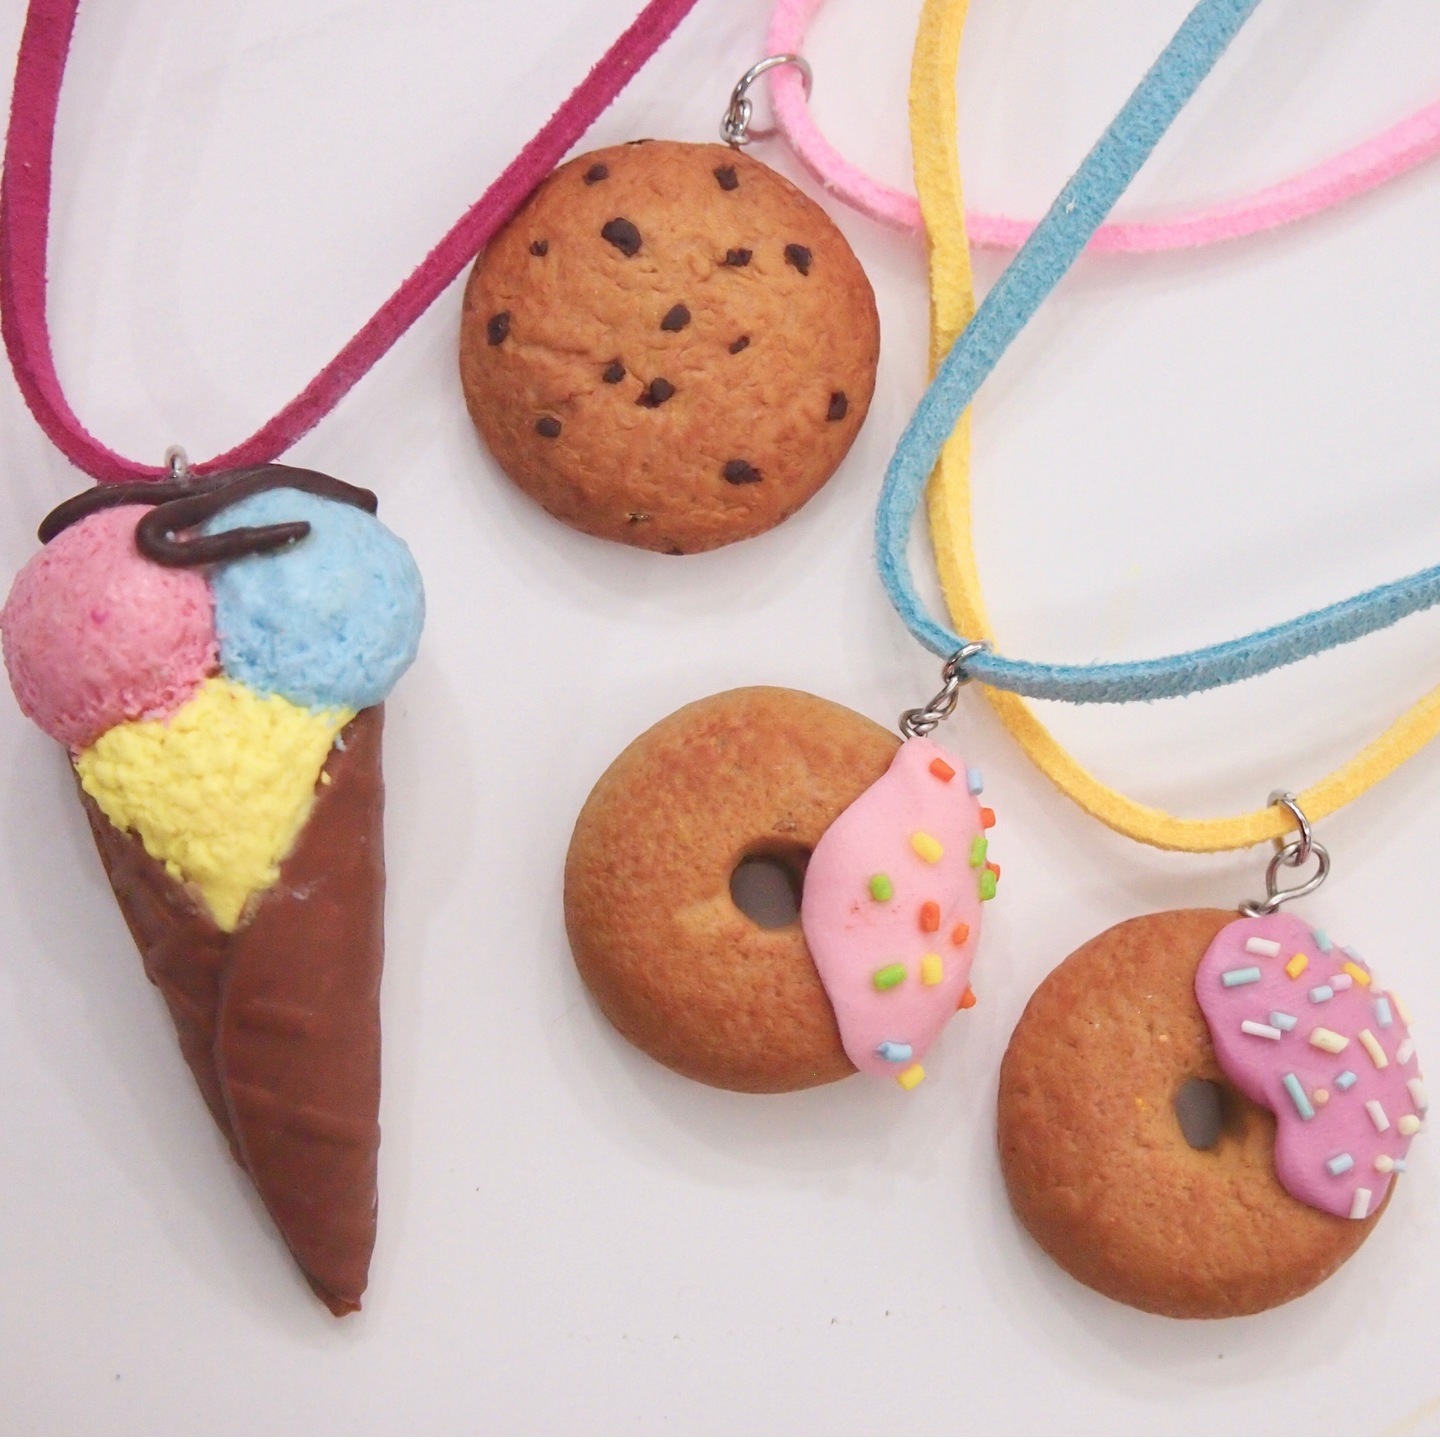 Workshop - Polymer Clay Ice Cream, Donut and Cookie charm